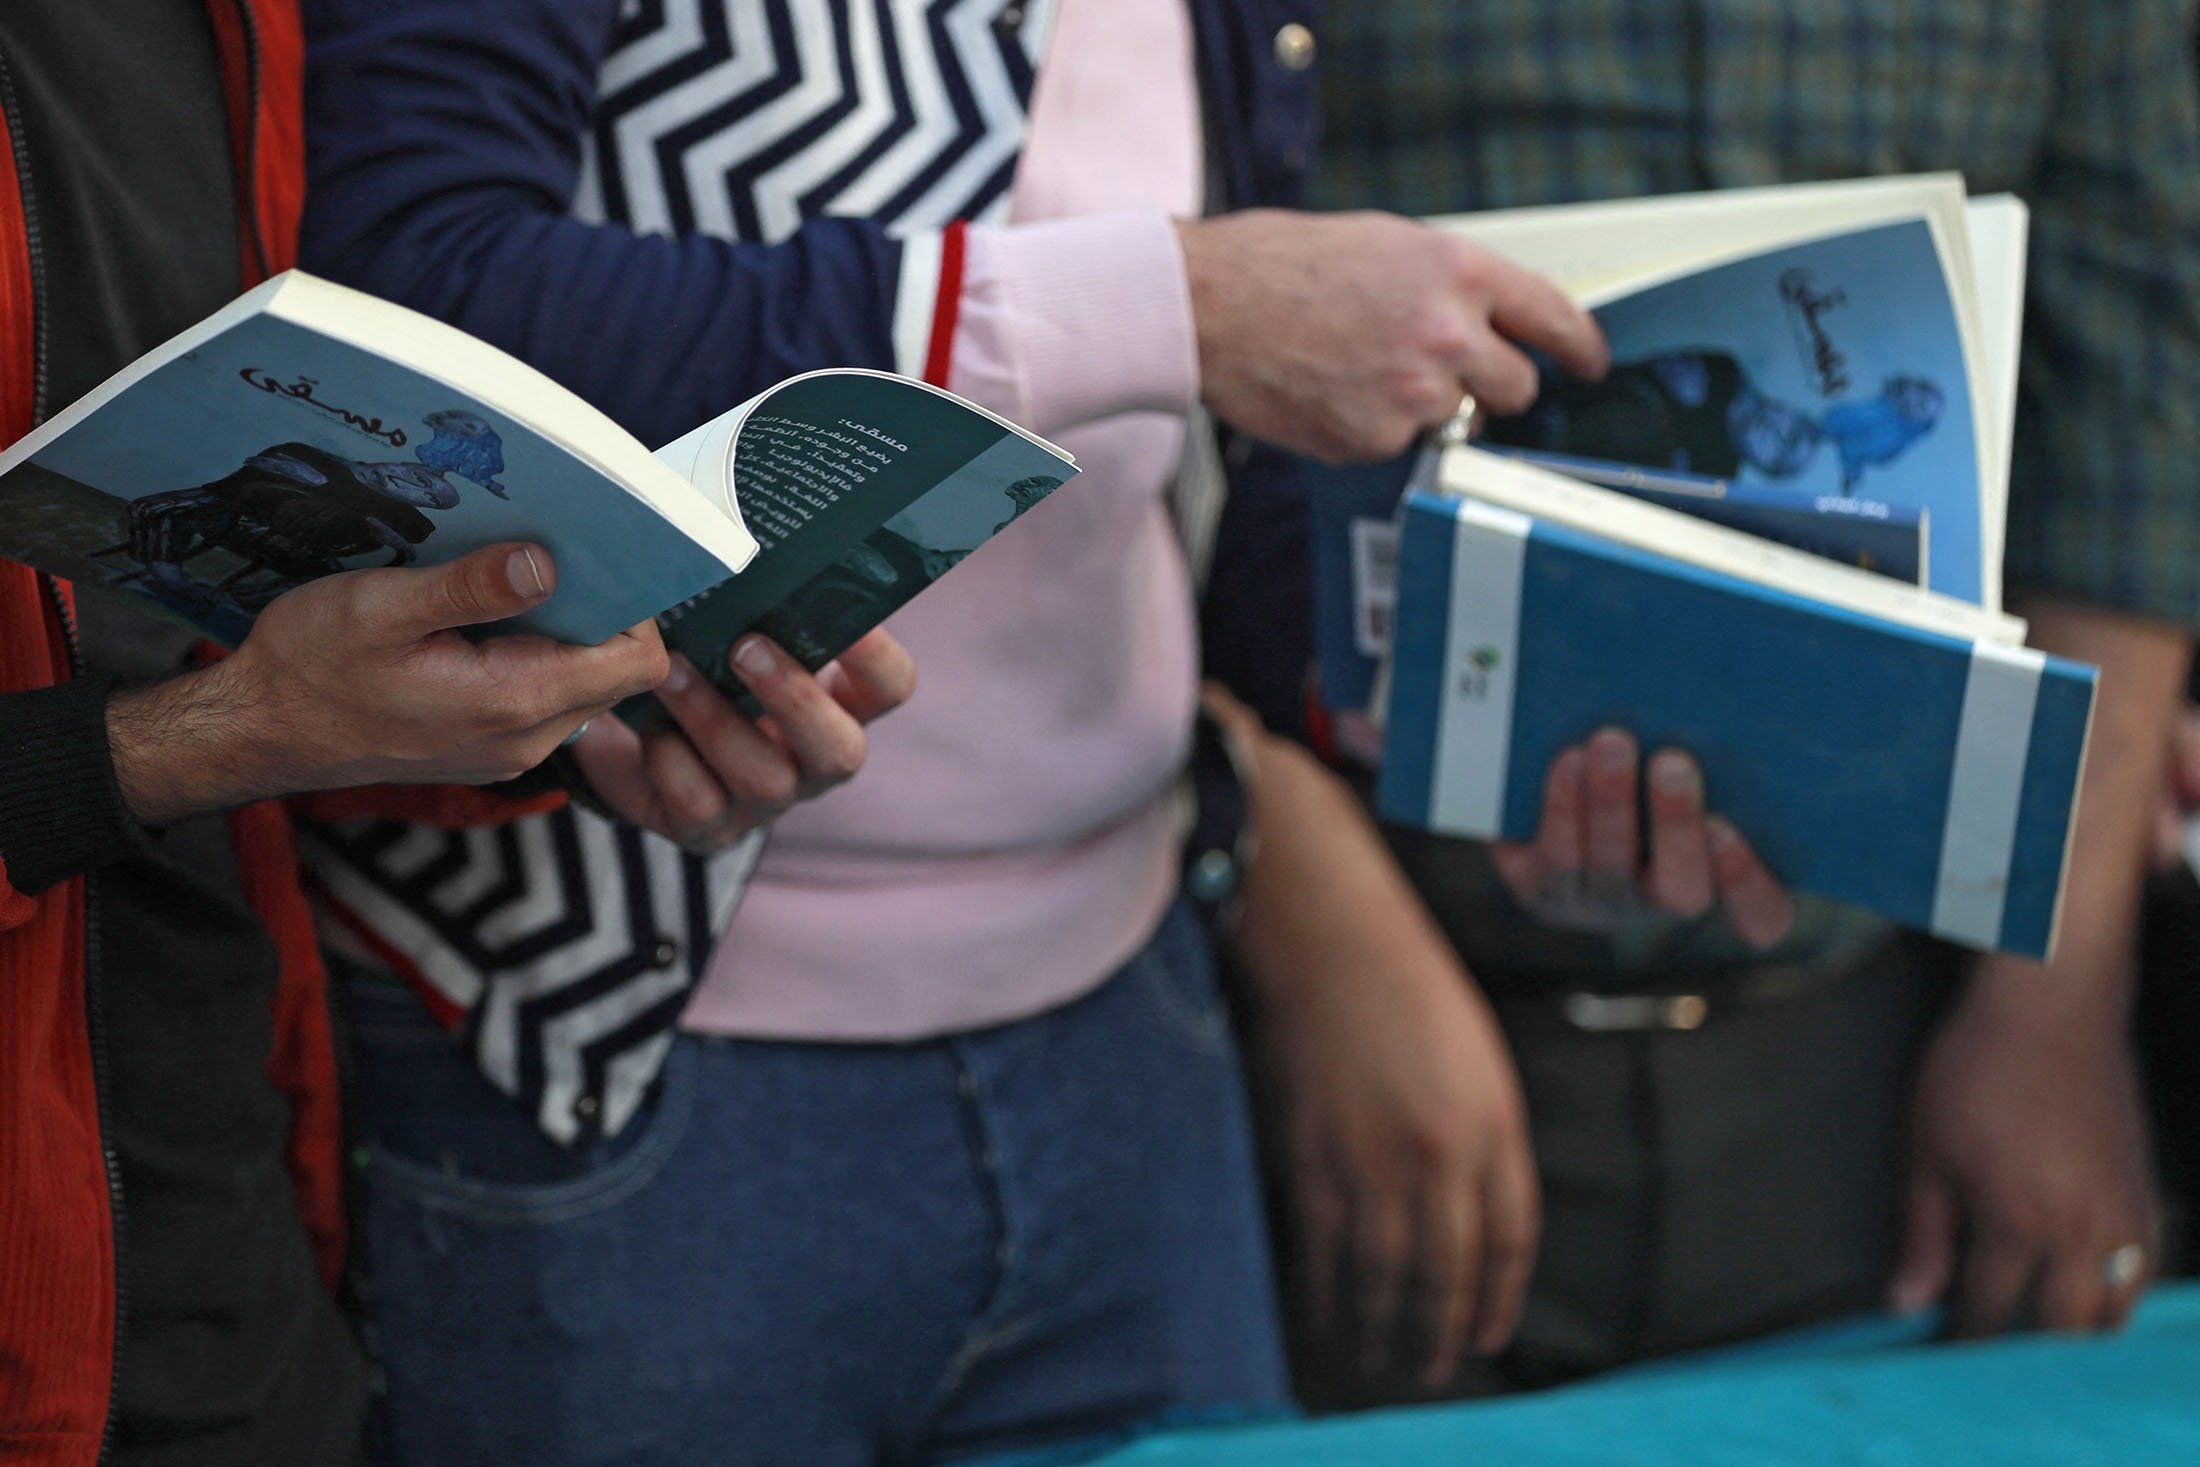 Iraqis browse through books during the eighth edition of an annual book festival in the Abu Nawas street, known for its bookshops and book stalls, along the banks of the Tigris, in the capital Baghdad, Iraq, Nov. 27, 2021. (AFP Photo)